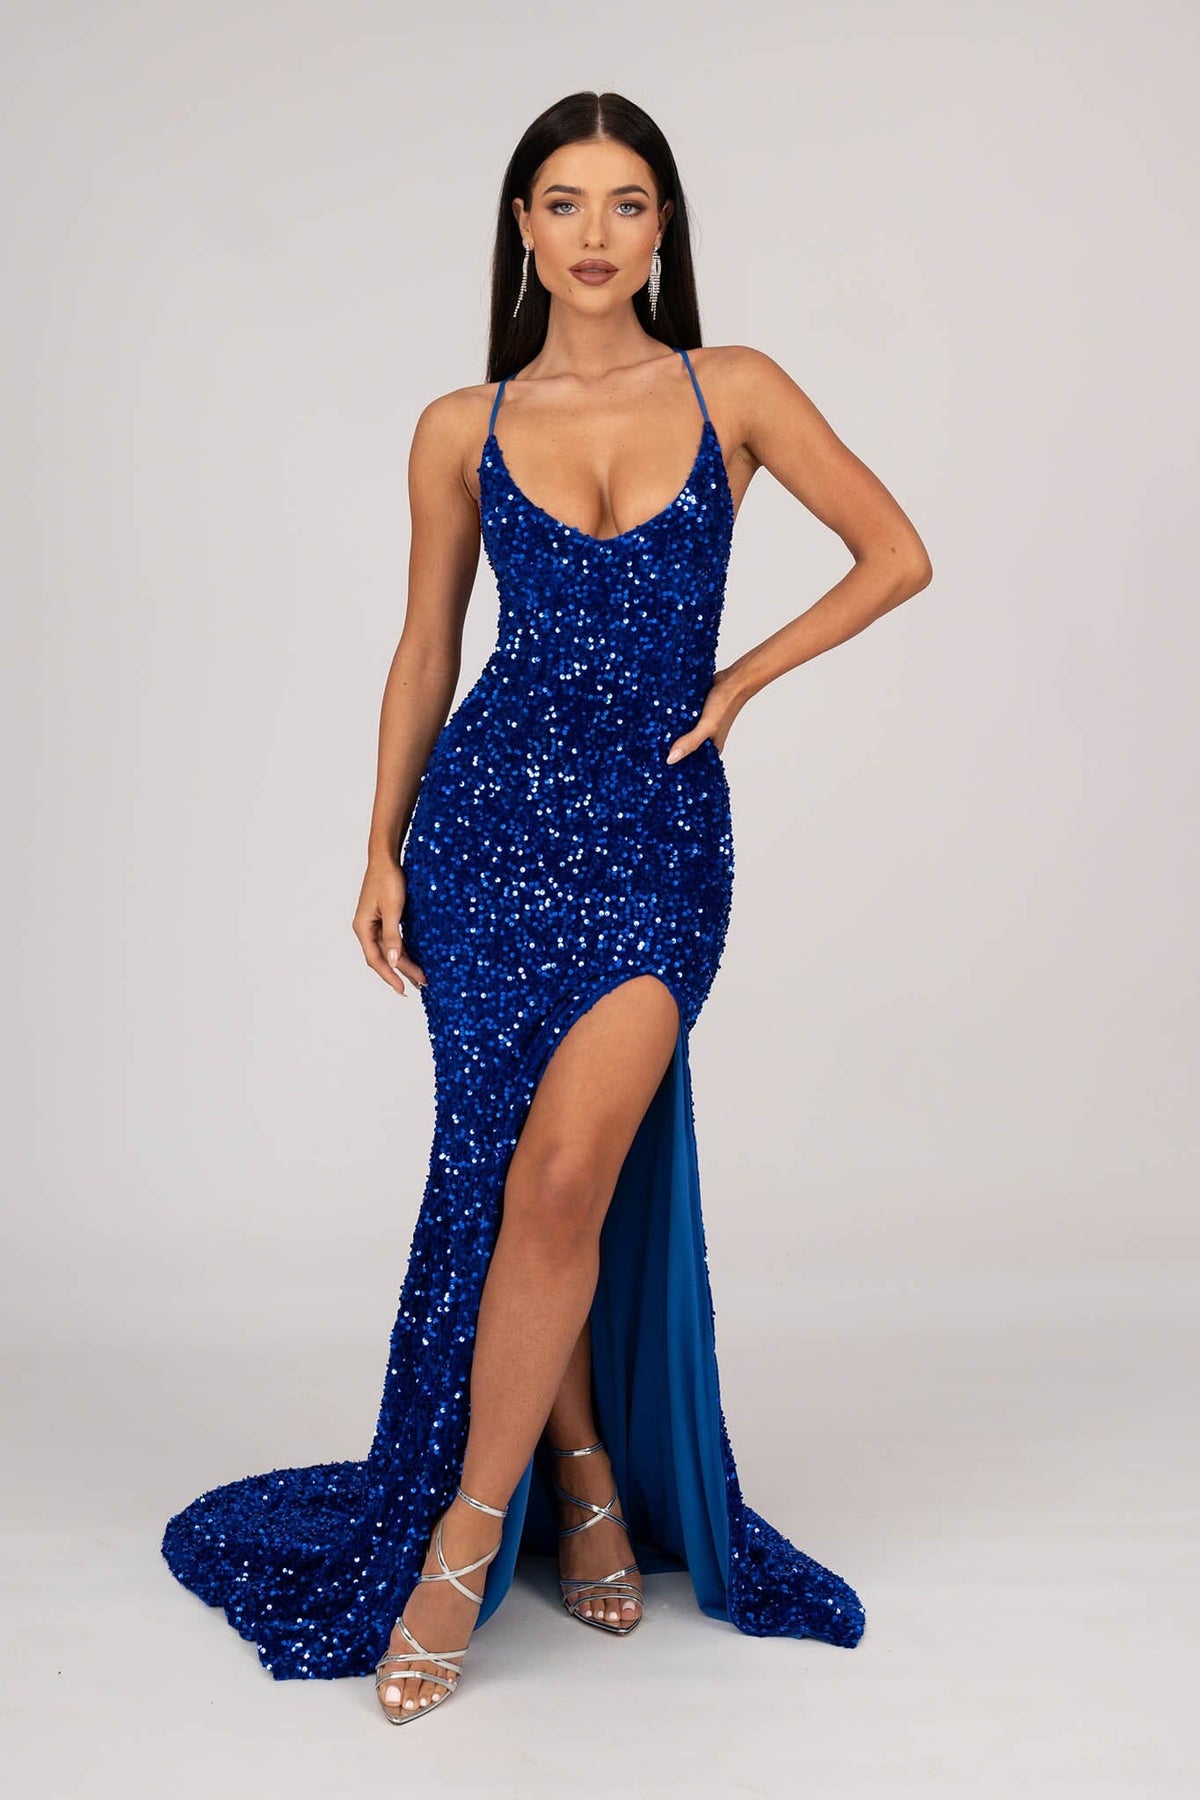 Navy Velvet Sequin Full Length Evening Gown with V Neckline, Thin Shoulder Straps, Thigh High Side Split and Lace Up Open Back